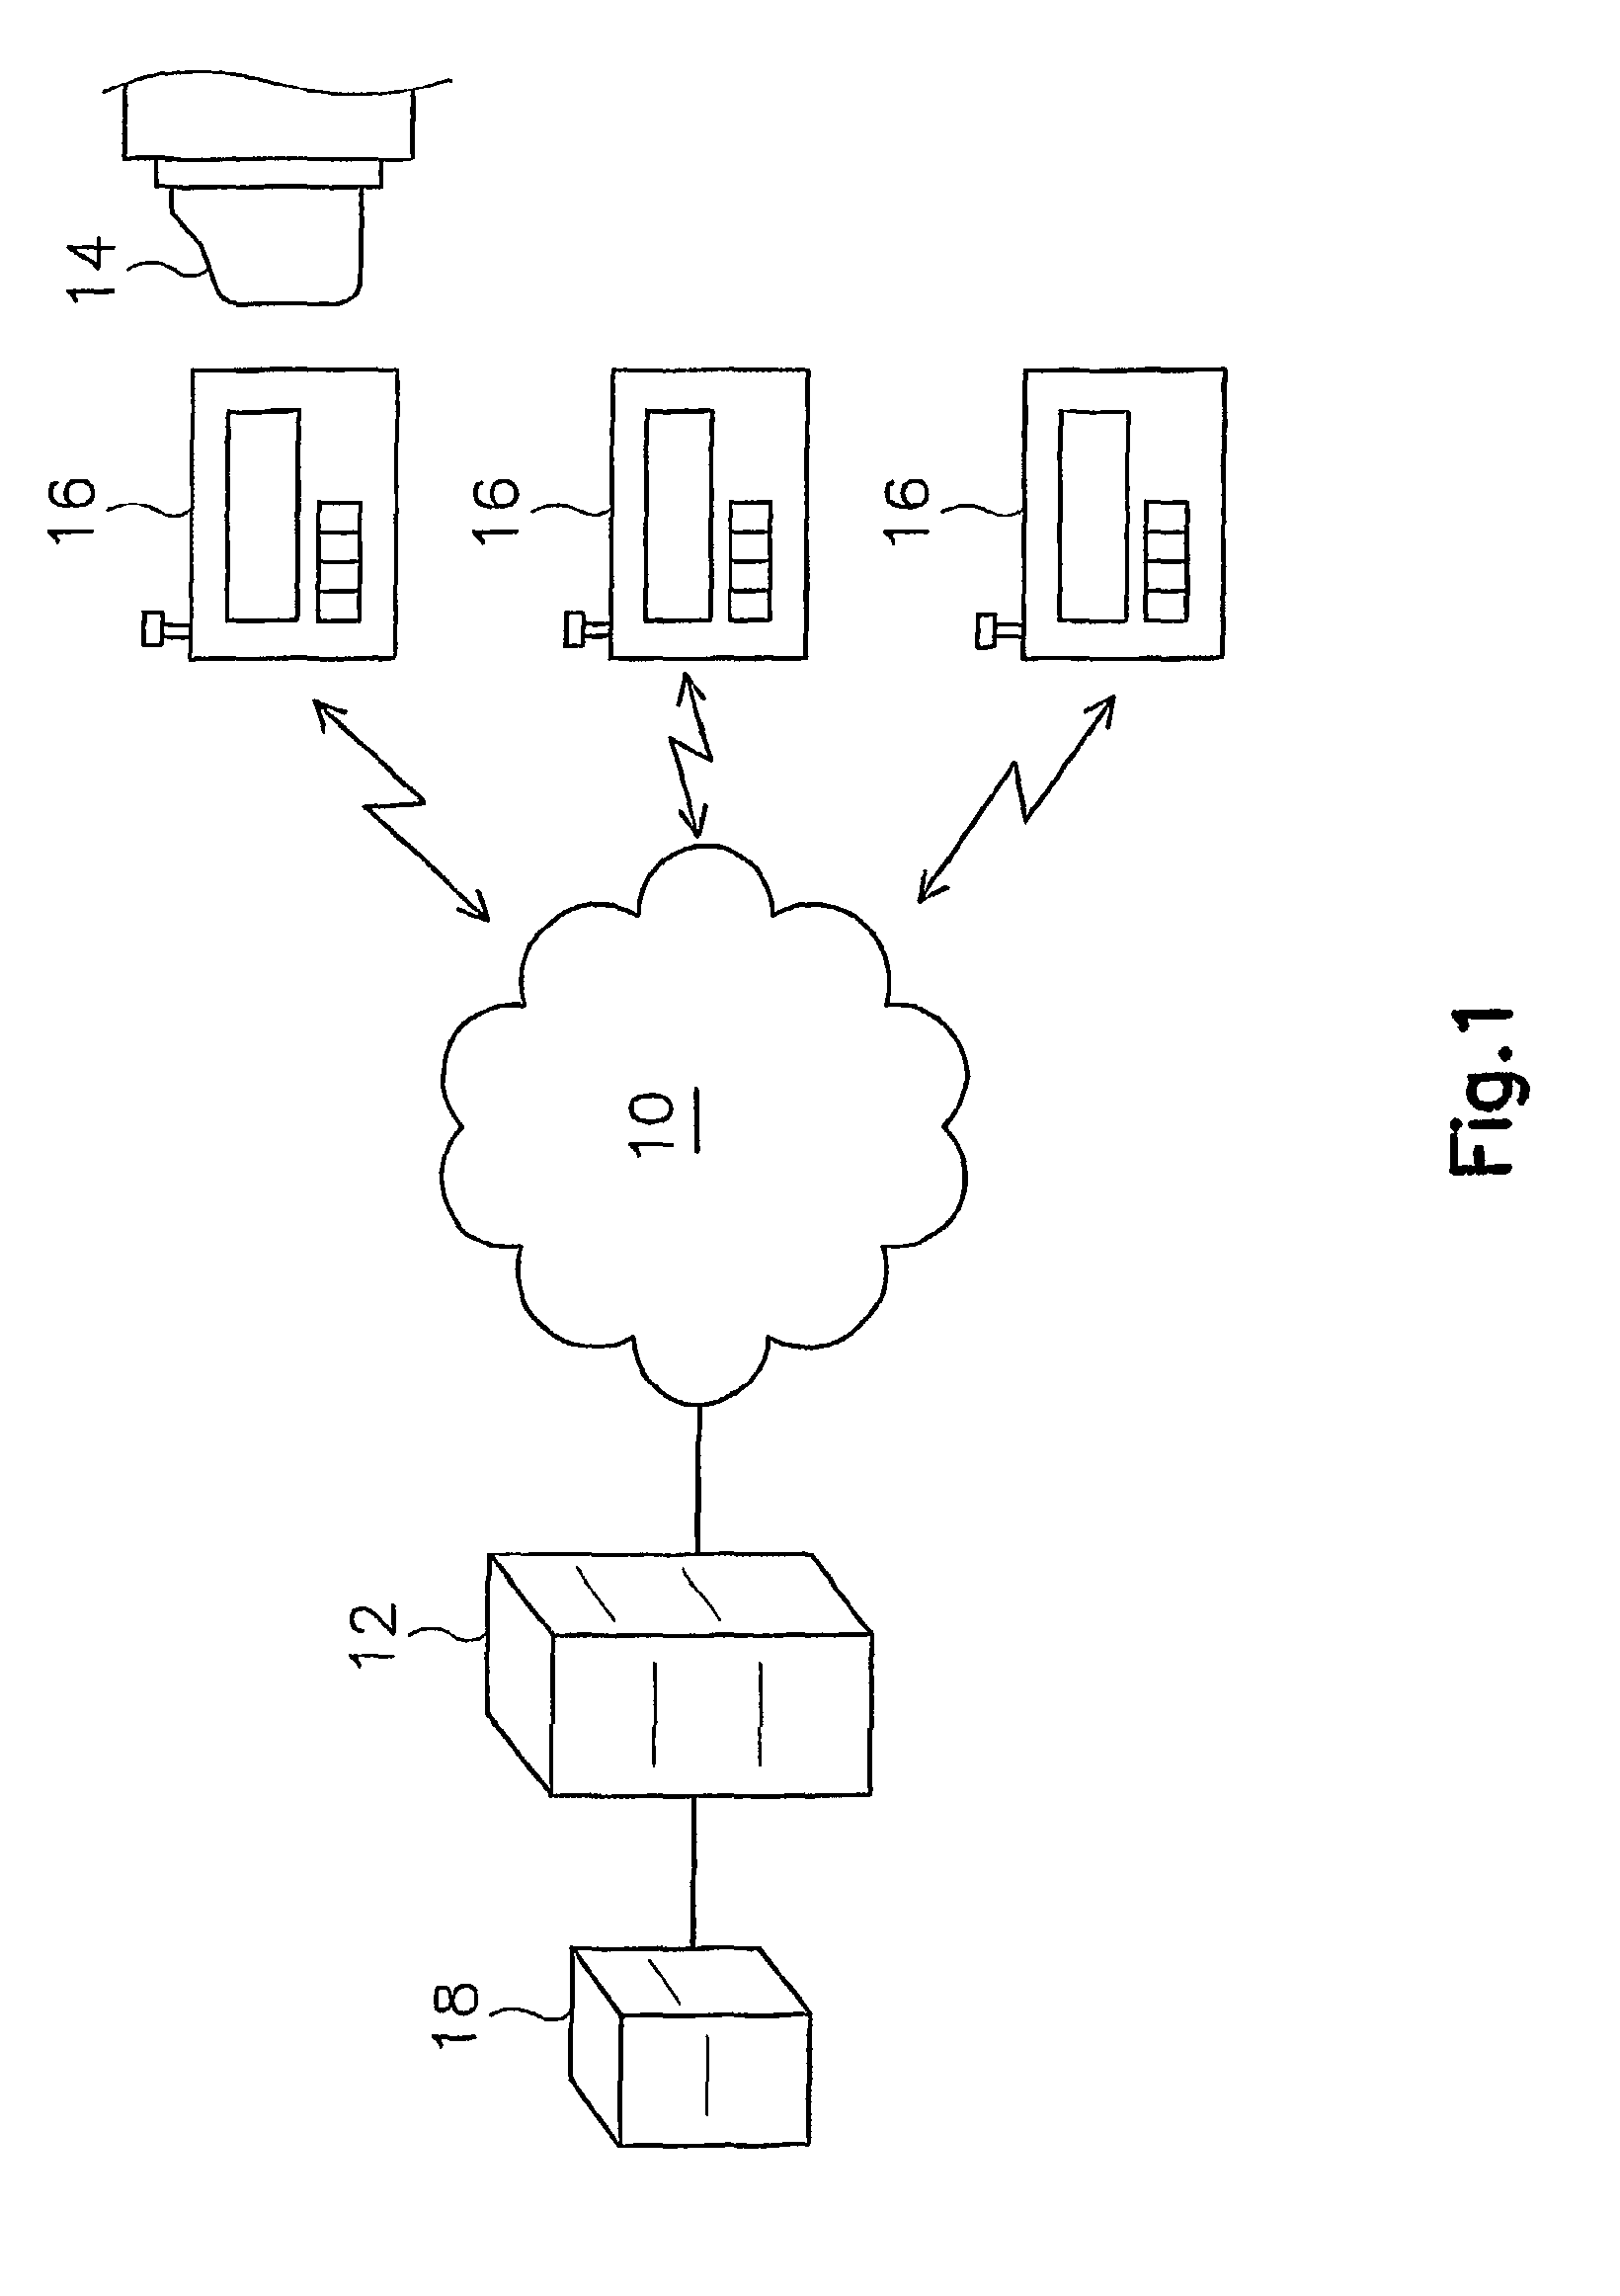 Wireless terminal for checking the amount used of gauge and a gauge management system using a wireless communication network